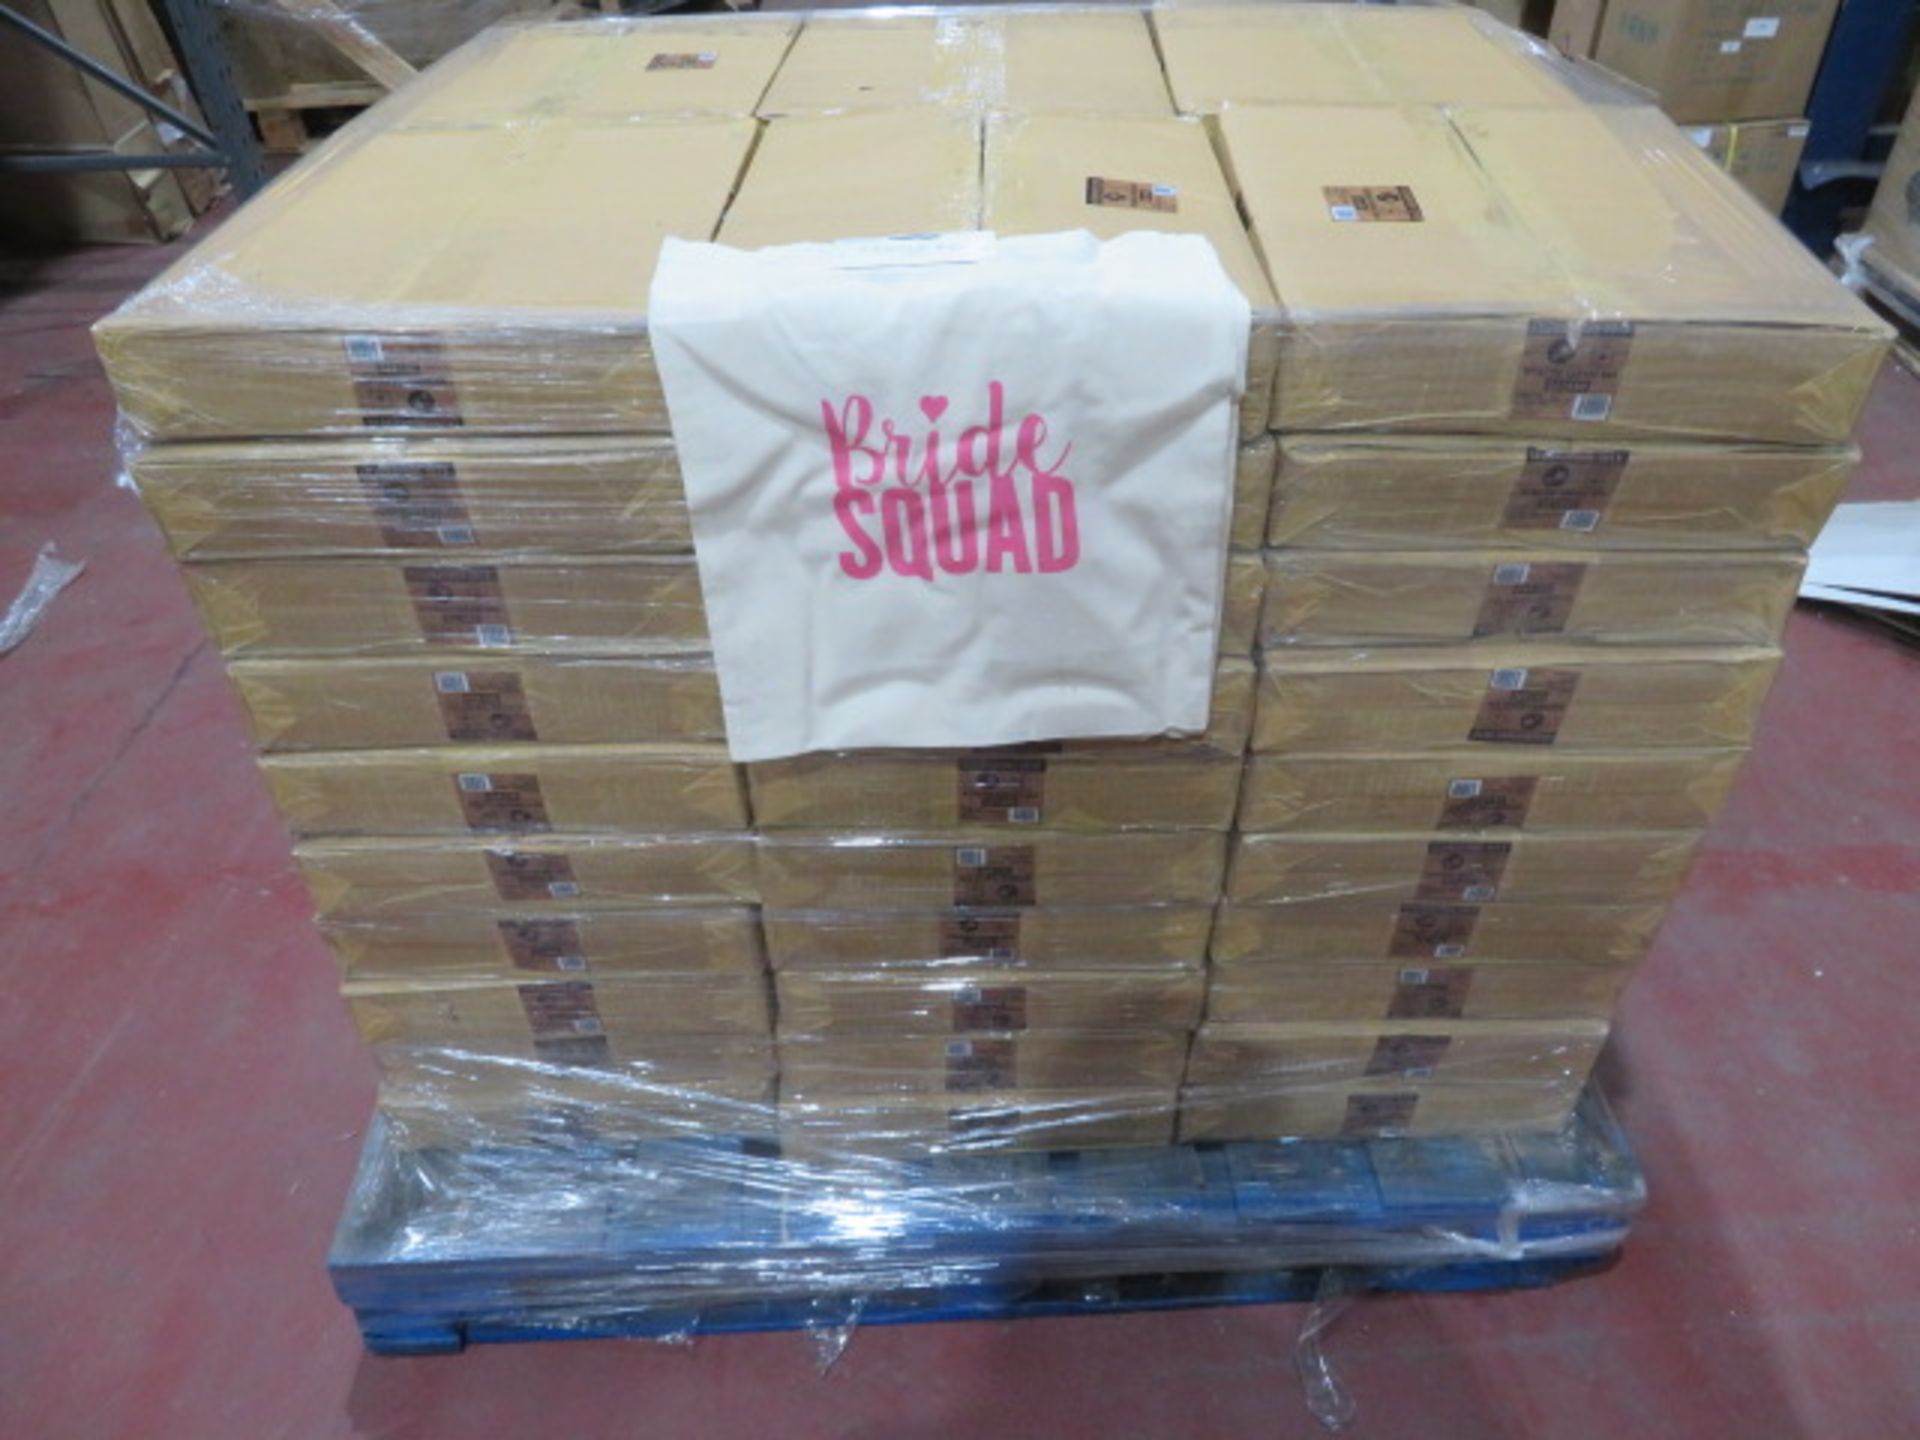 (P29) PALLET TO CONTAIN 1,440 x BRIDE SQUAD CANVAS BAGS - NEW - RRP £4.99 EACH - Image 2 of 2